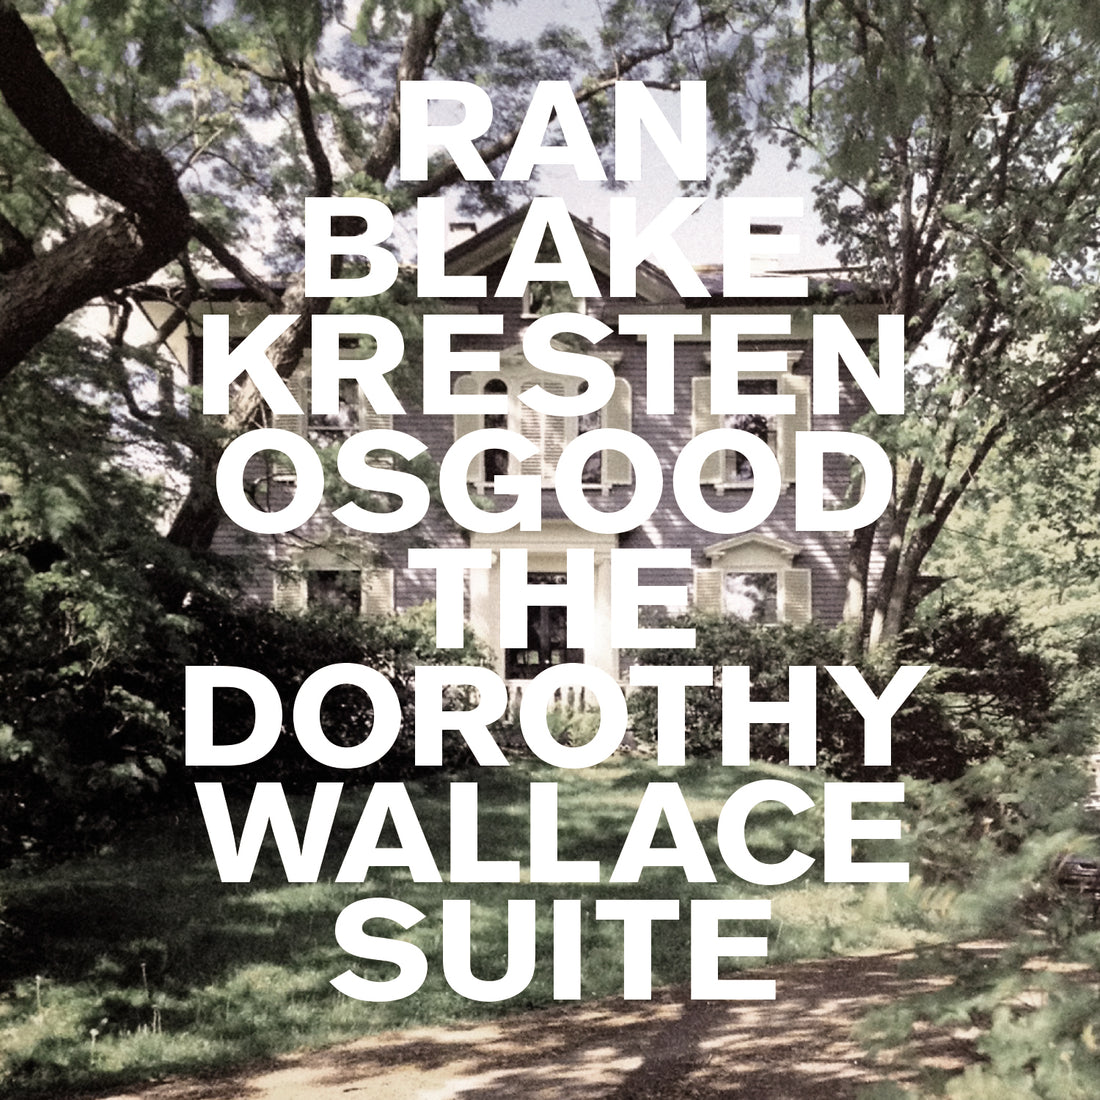 Ran Blake & Kresten Osgood's new album "The Dorothy Wallace Suite" is out!